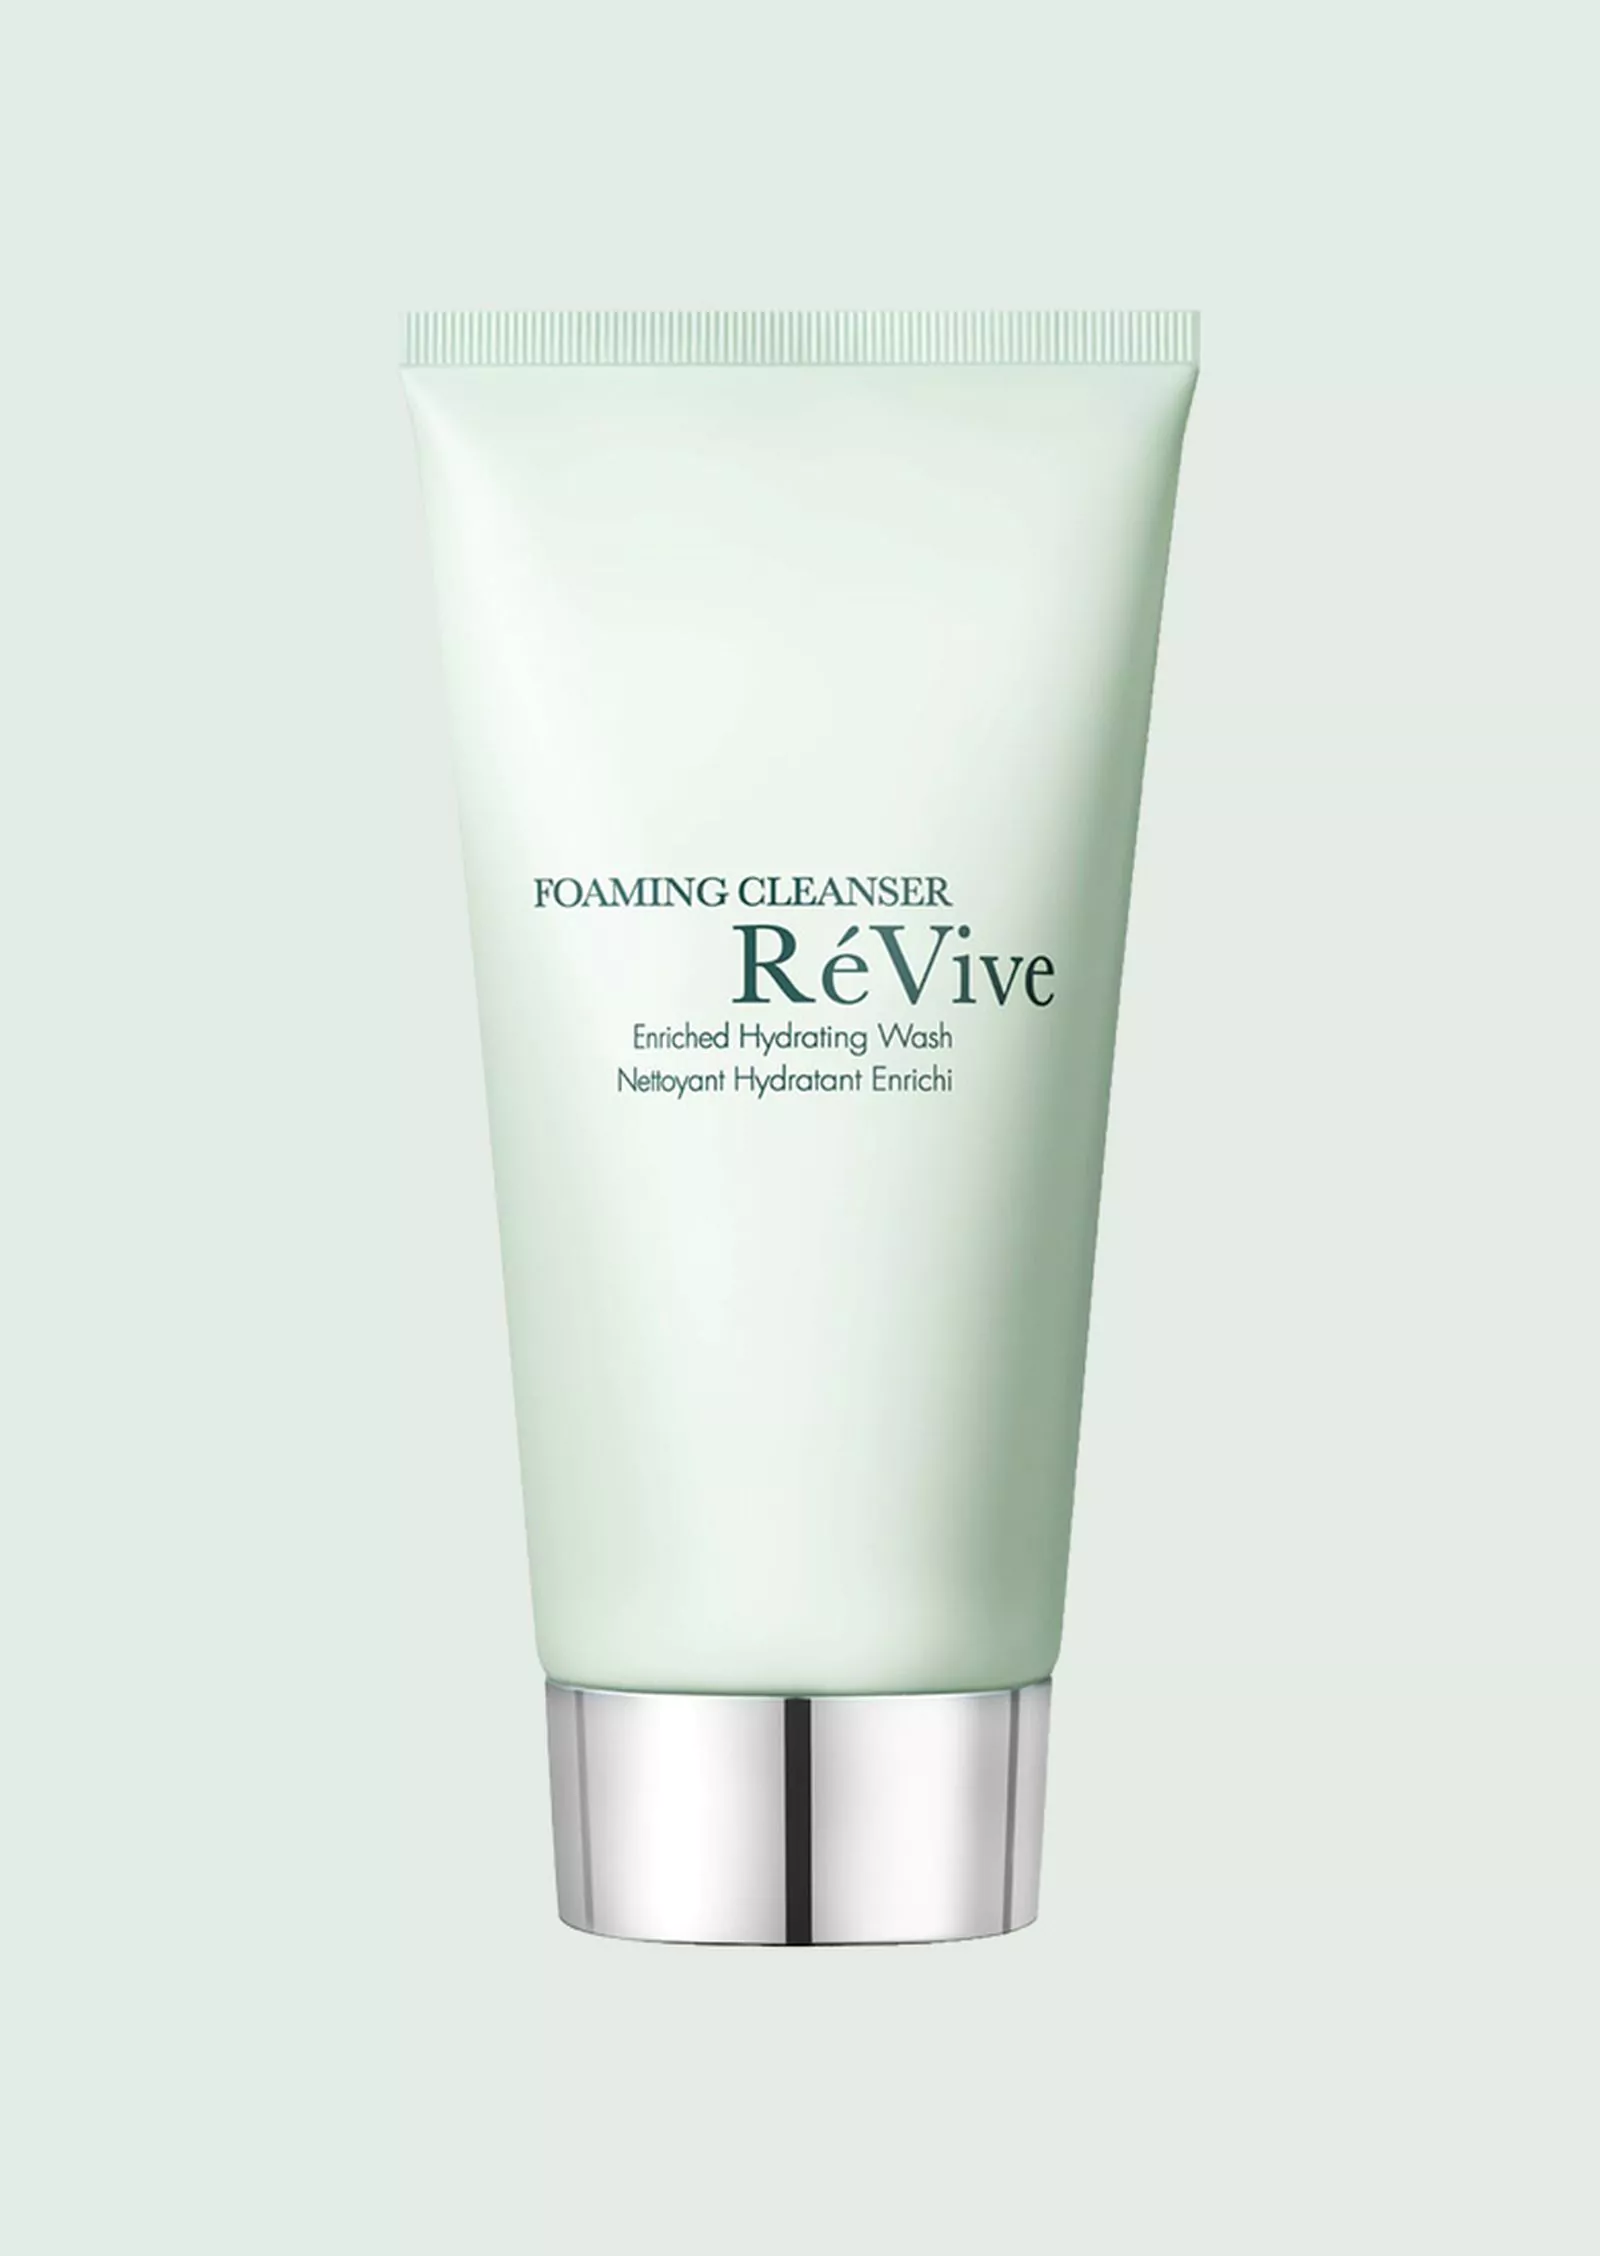 RéVive Foaming Cleanser Enriched Hydrating Wash